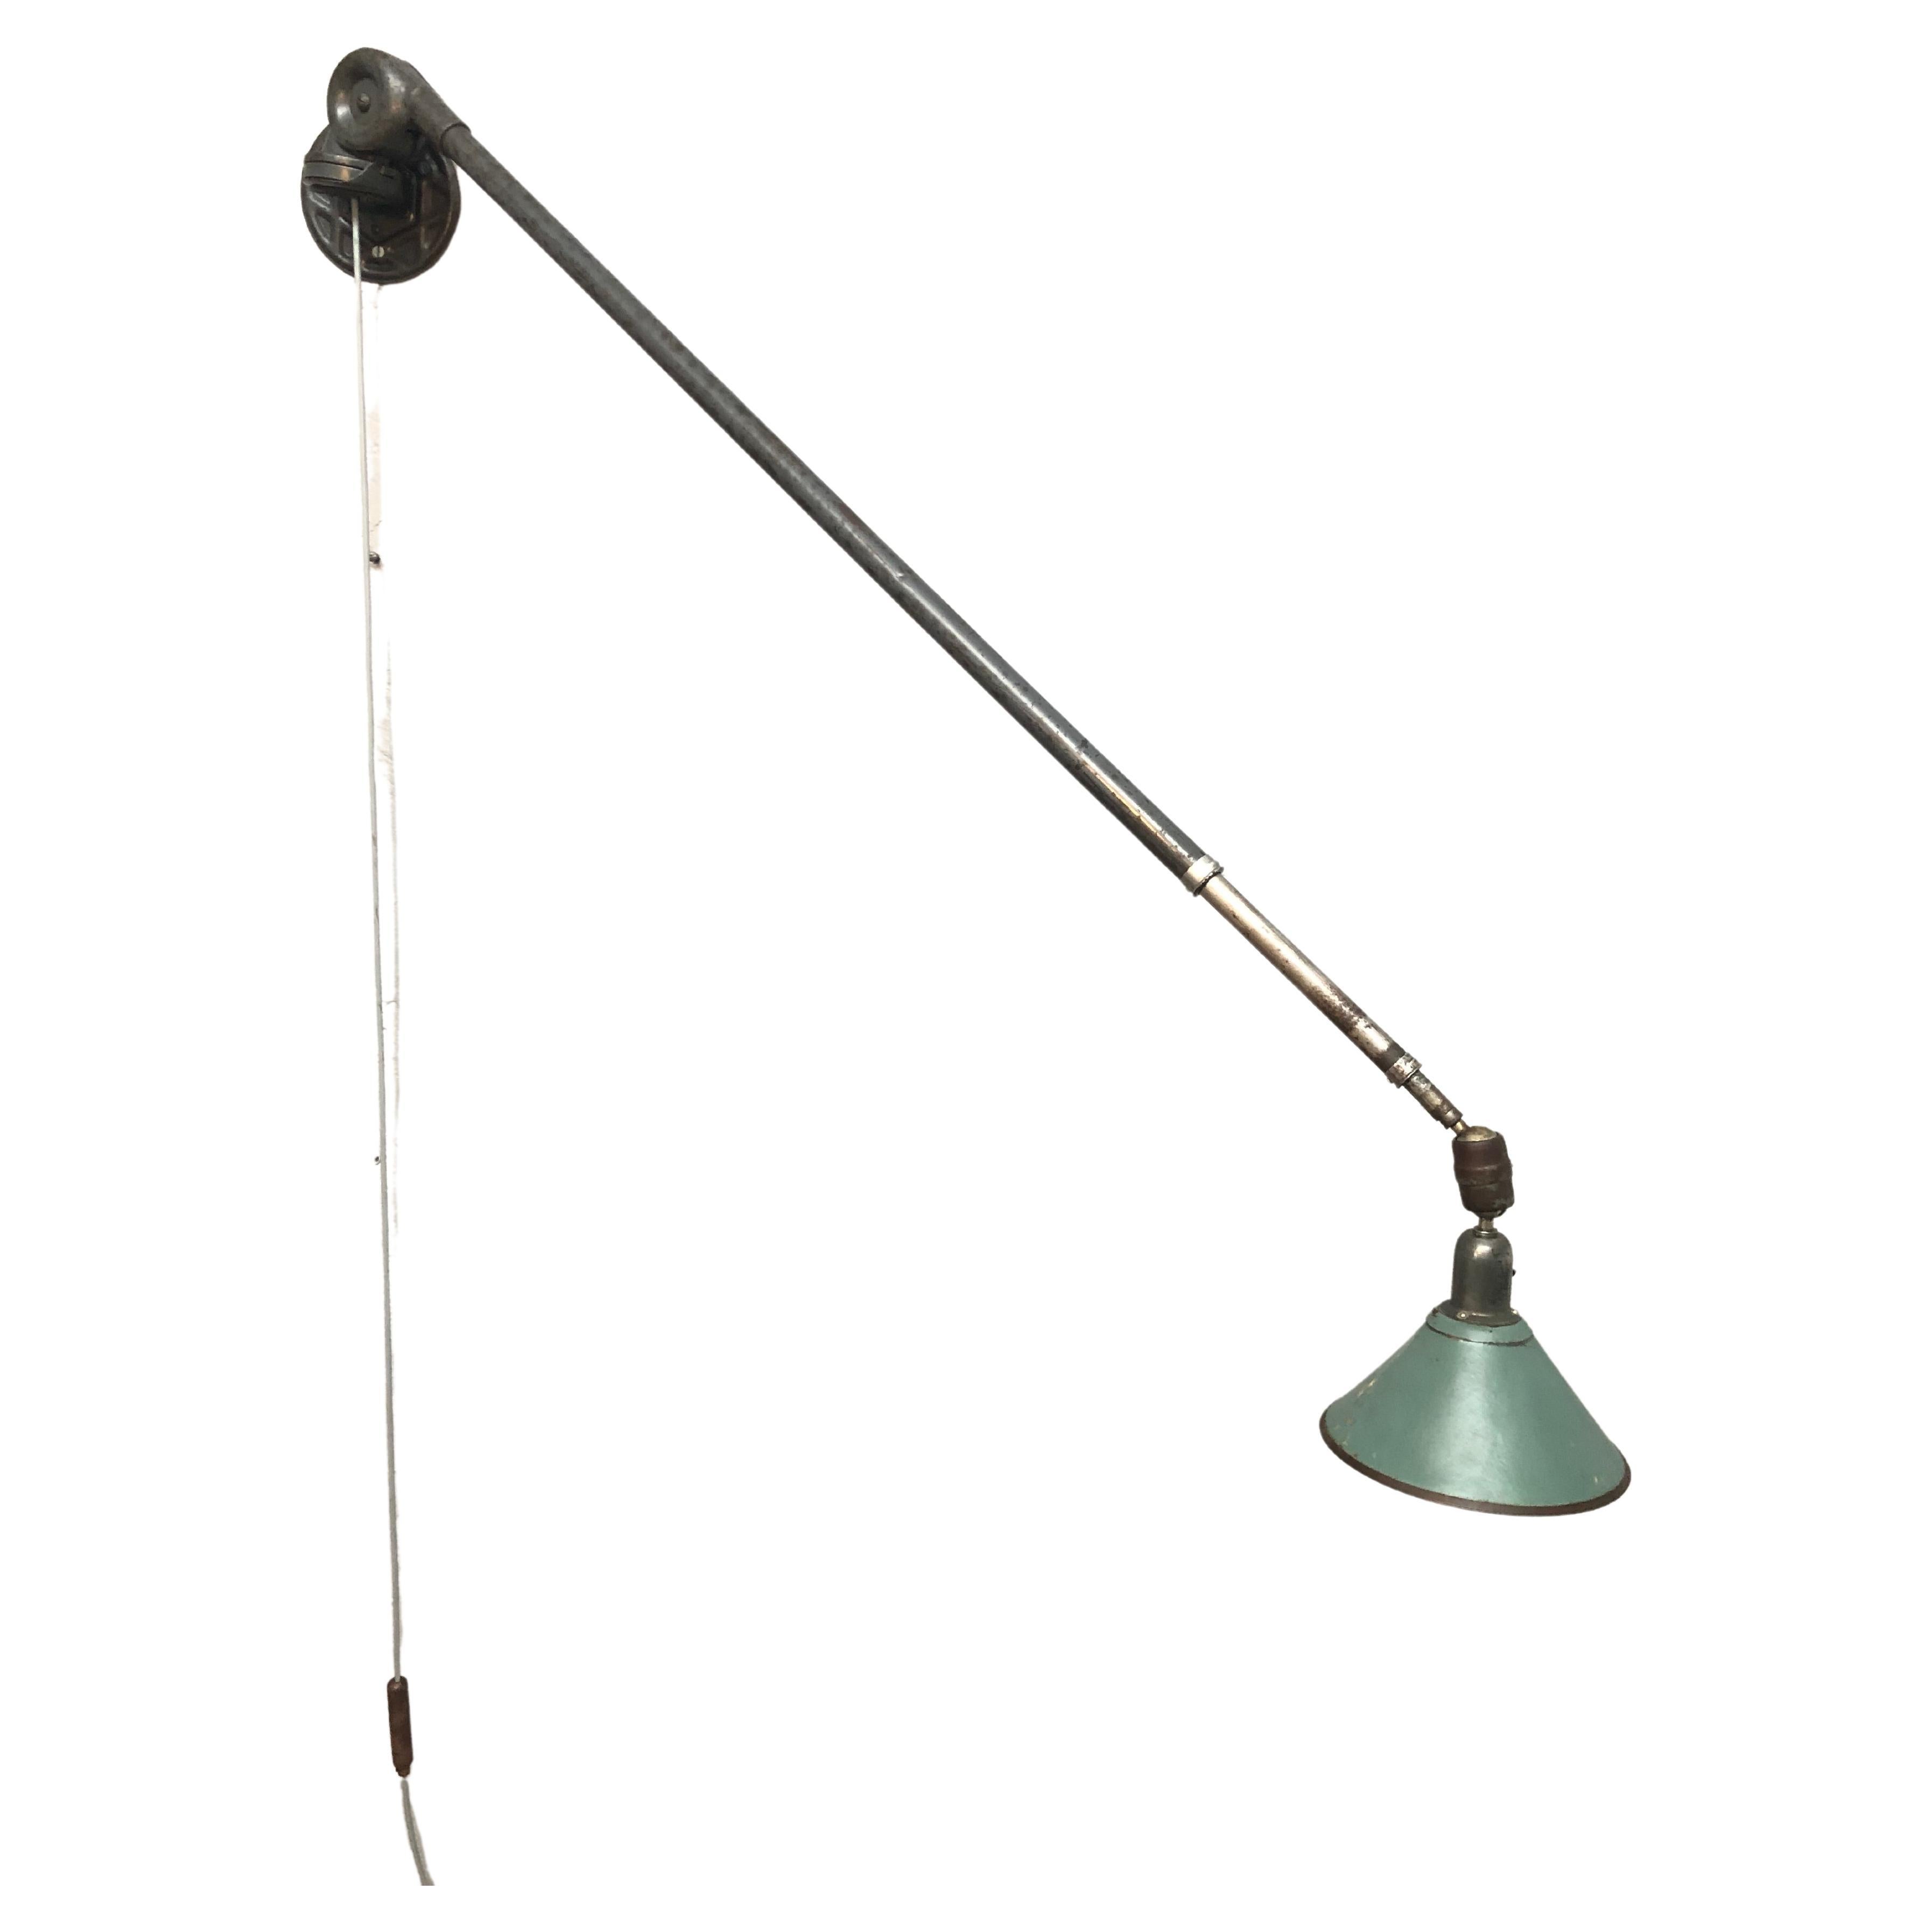 Rare Series 1 Antique Triplex Industrial Lamp by Johan Petter Johansson for ASEA For Sale